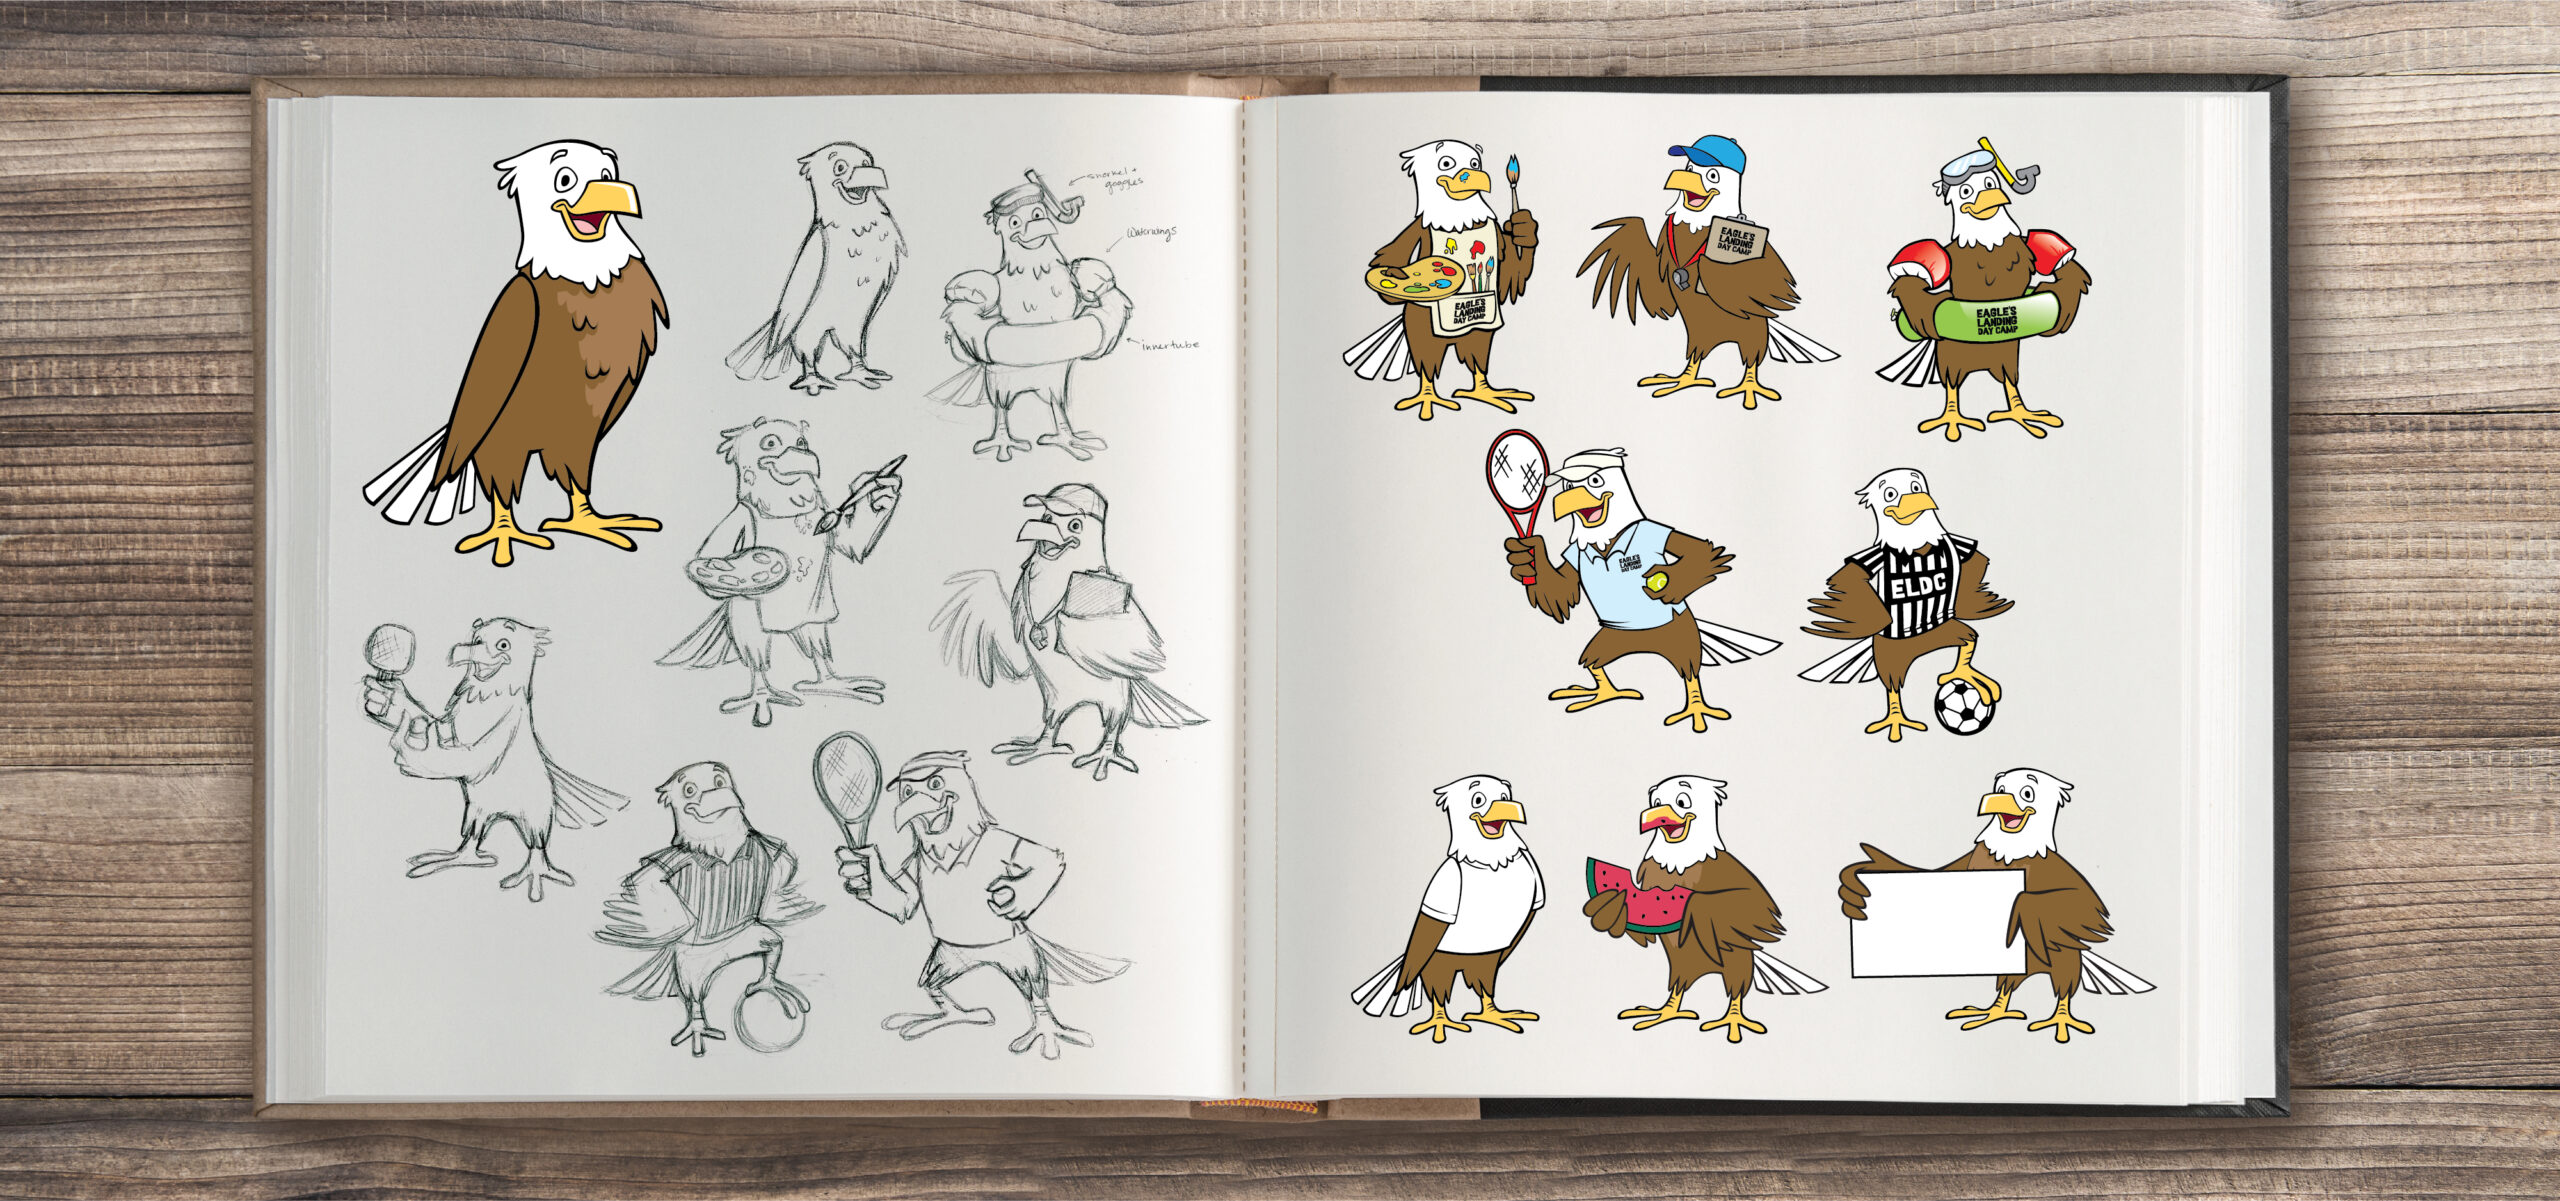 Eagle's Landing Mascot Sketches in Variety of Poses and Costumes